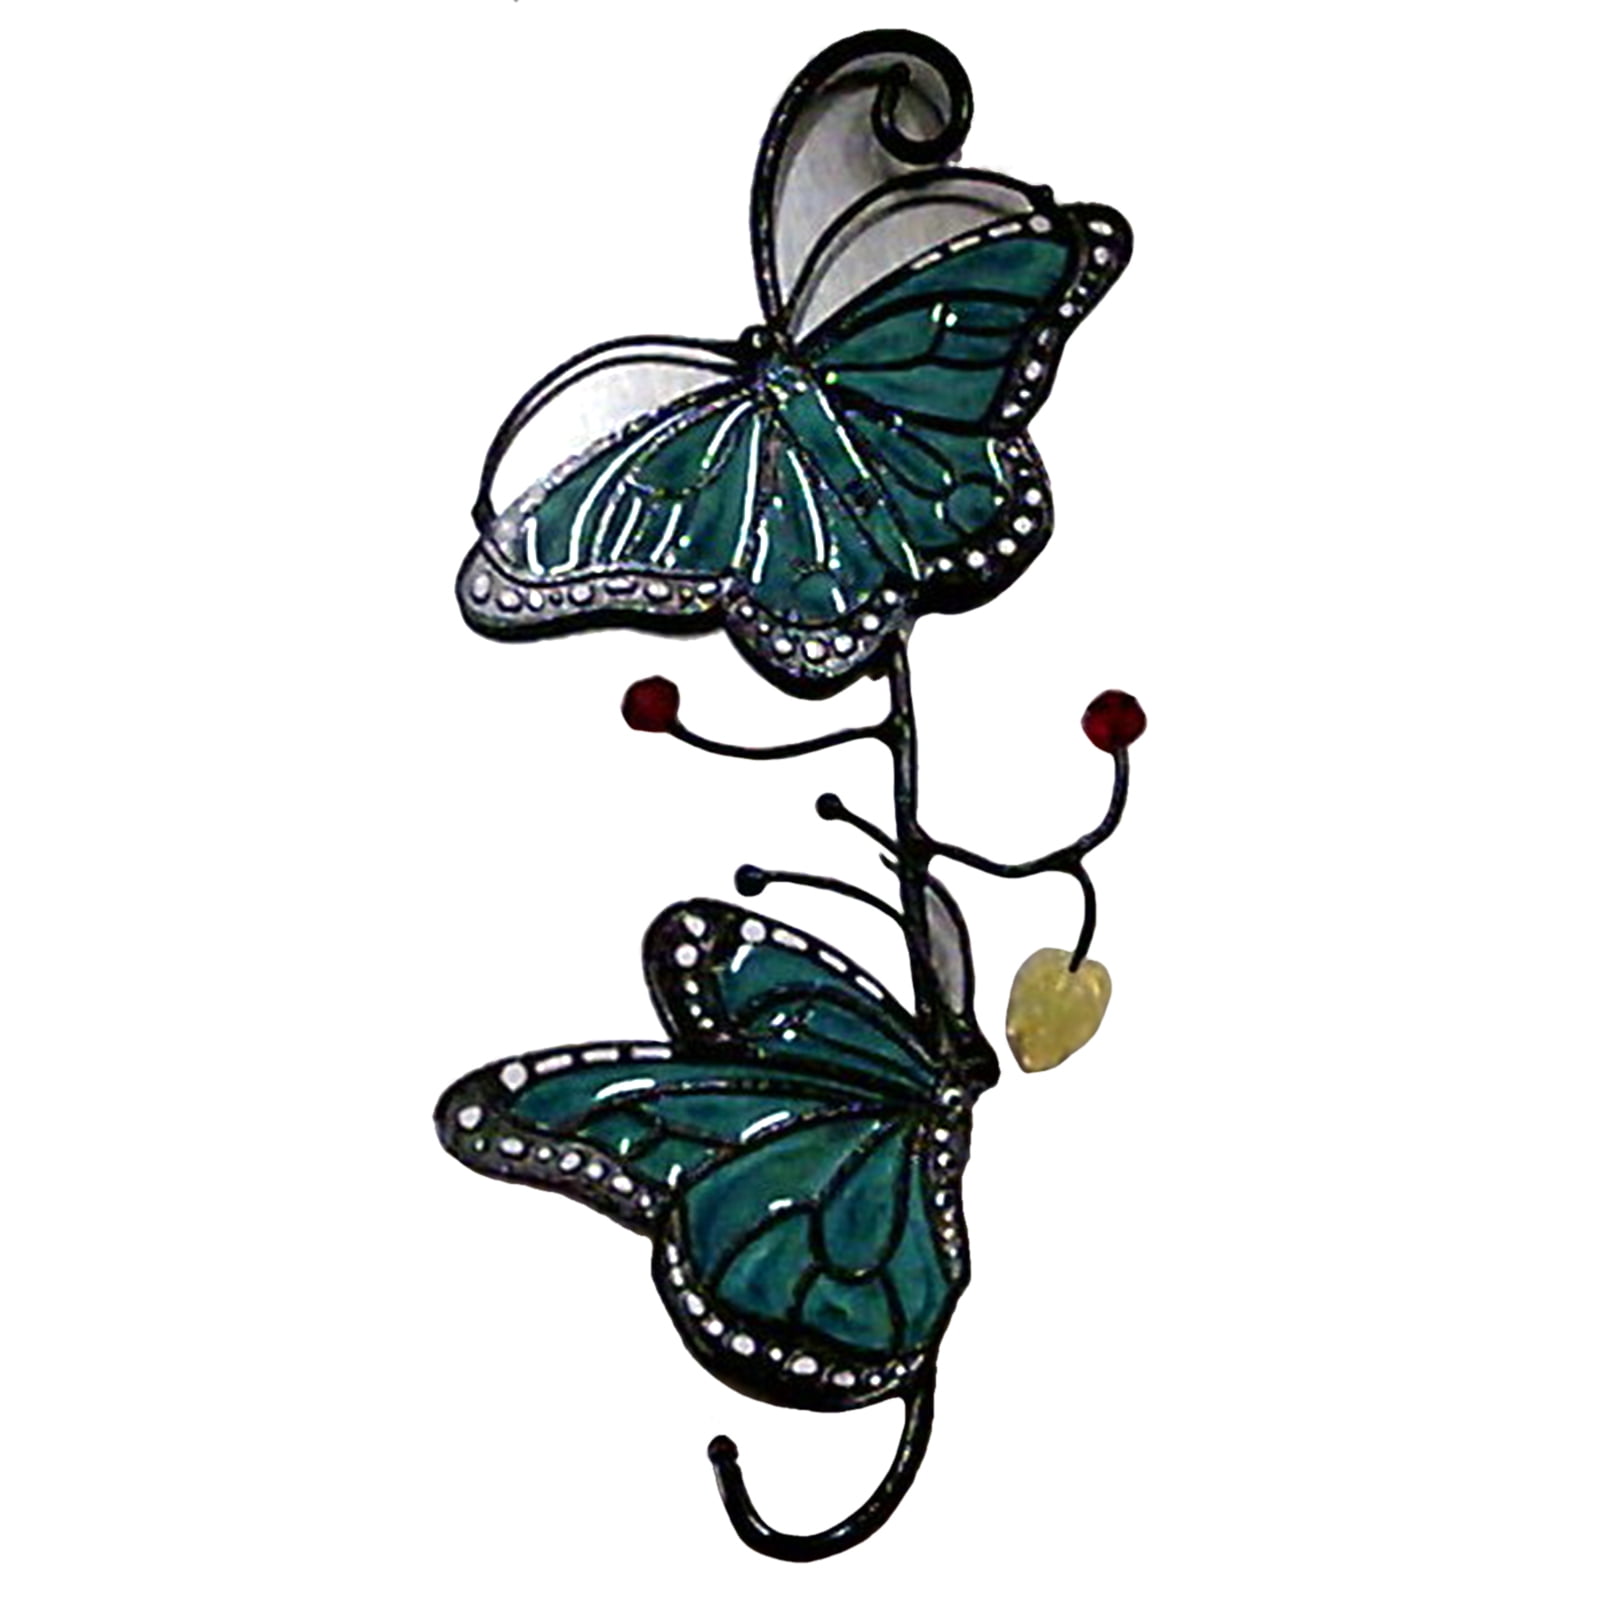 Stained Window Hangings,Butterfly Glass-Like Window Hangings Ornament Suncatcher Butterfly Series Pendant VanlentineS Day Home Decoration Butterfly Ornament Memorial Handicrafts Gifts Blue